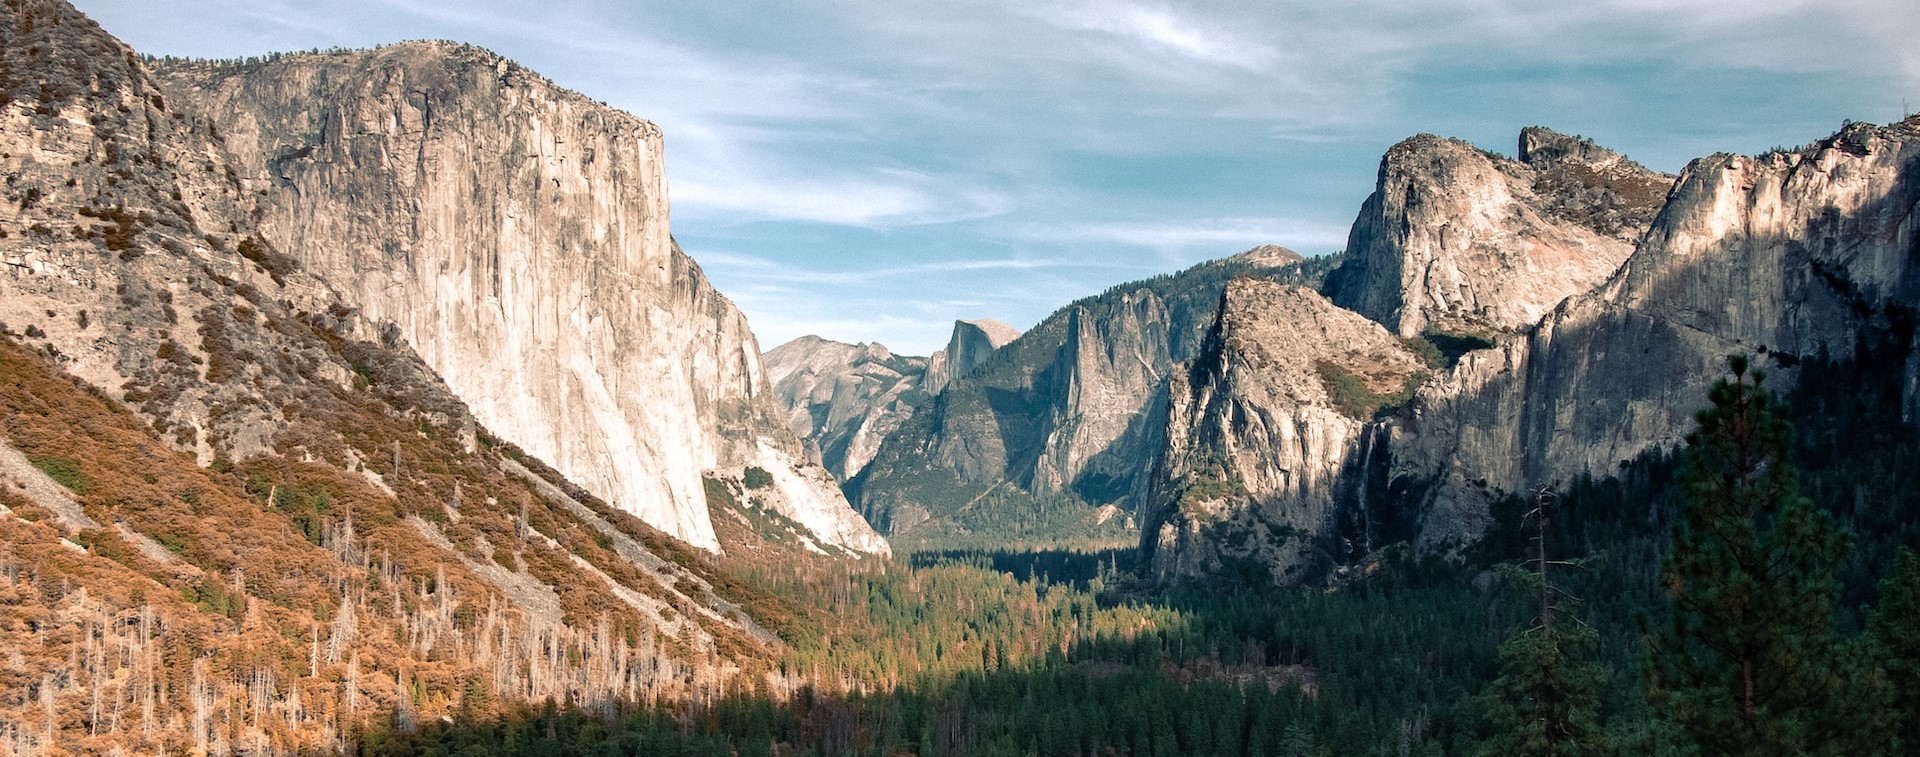 Yosemite National Park is in California’s Sierra Nevada mountains | Breast Cancer Car Donations